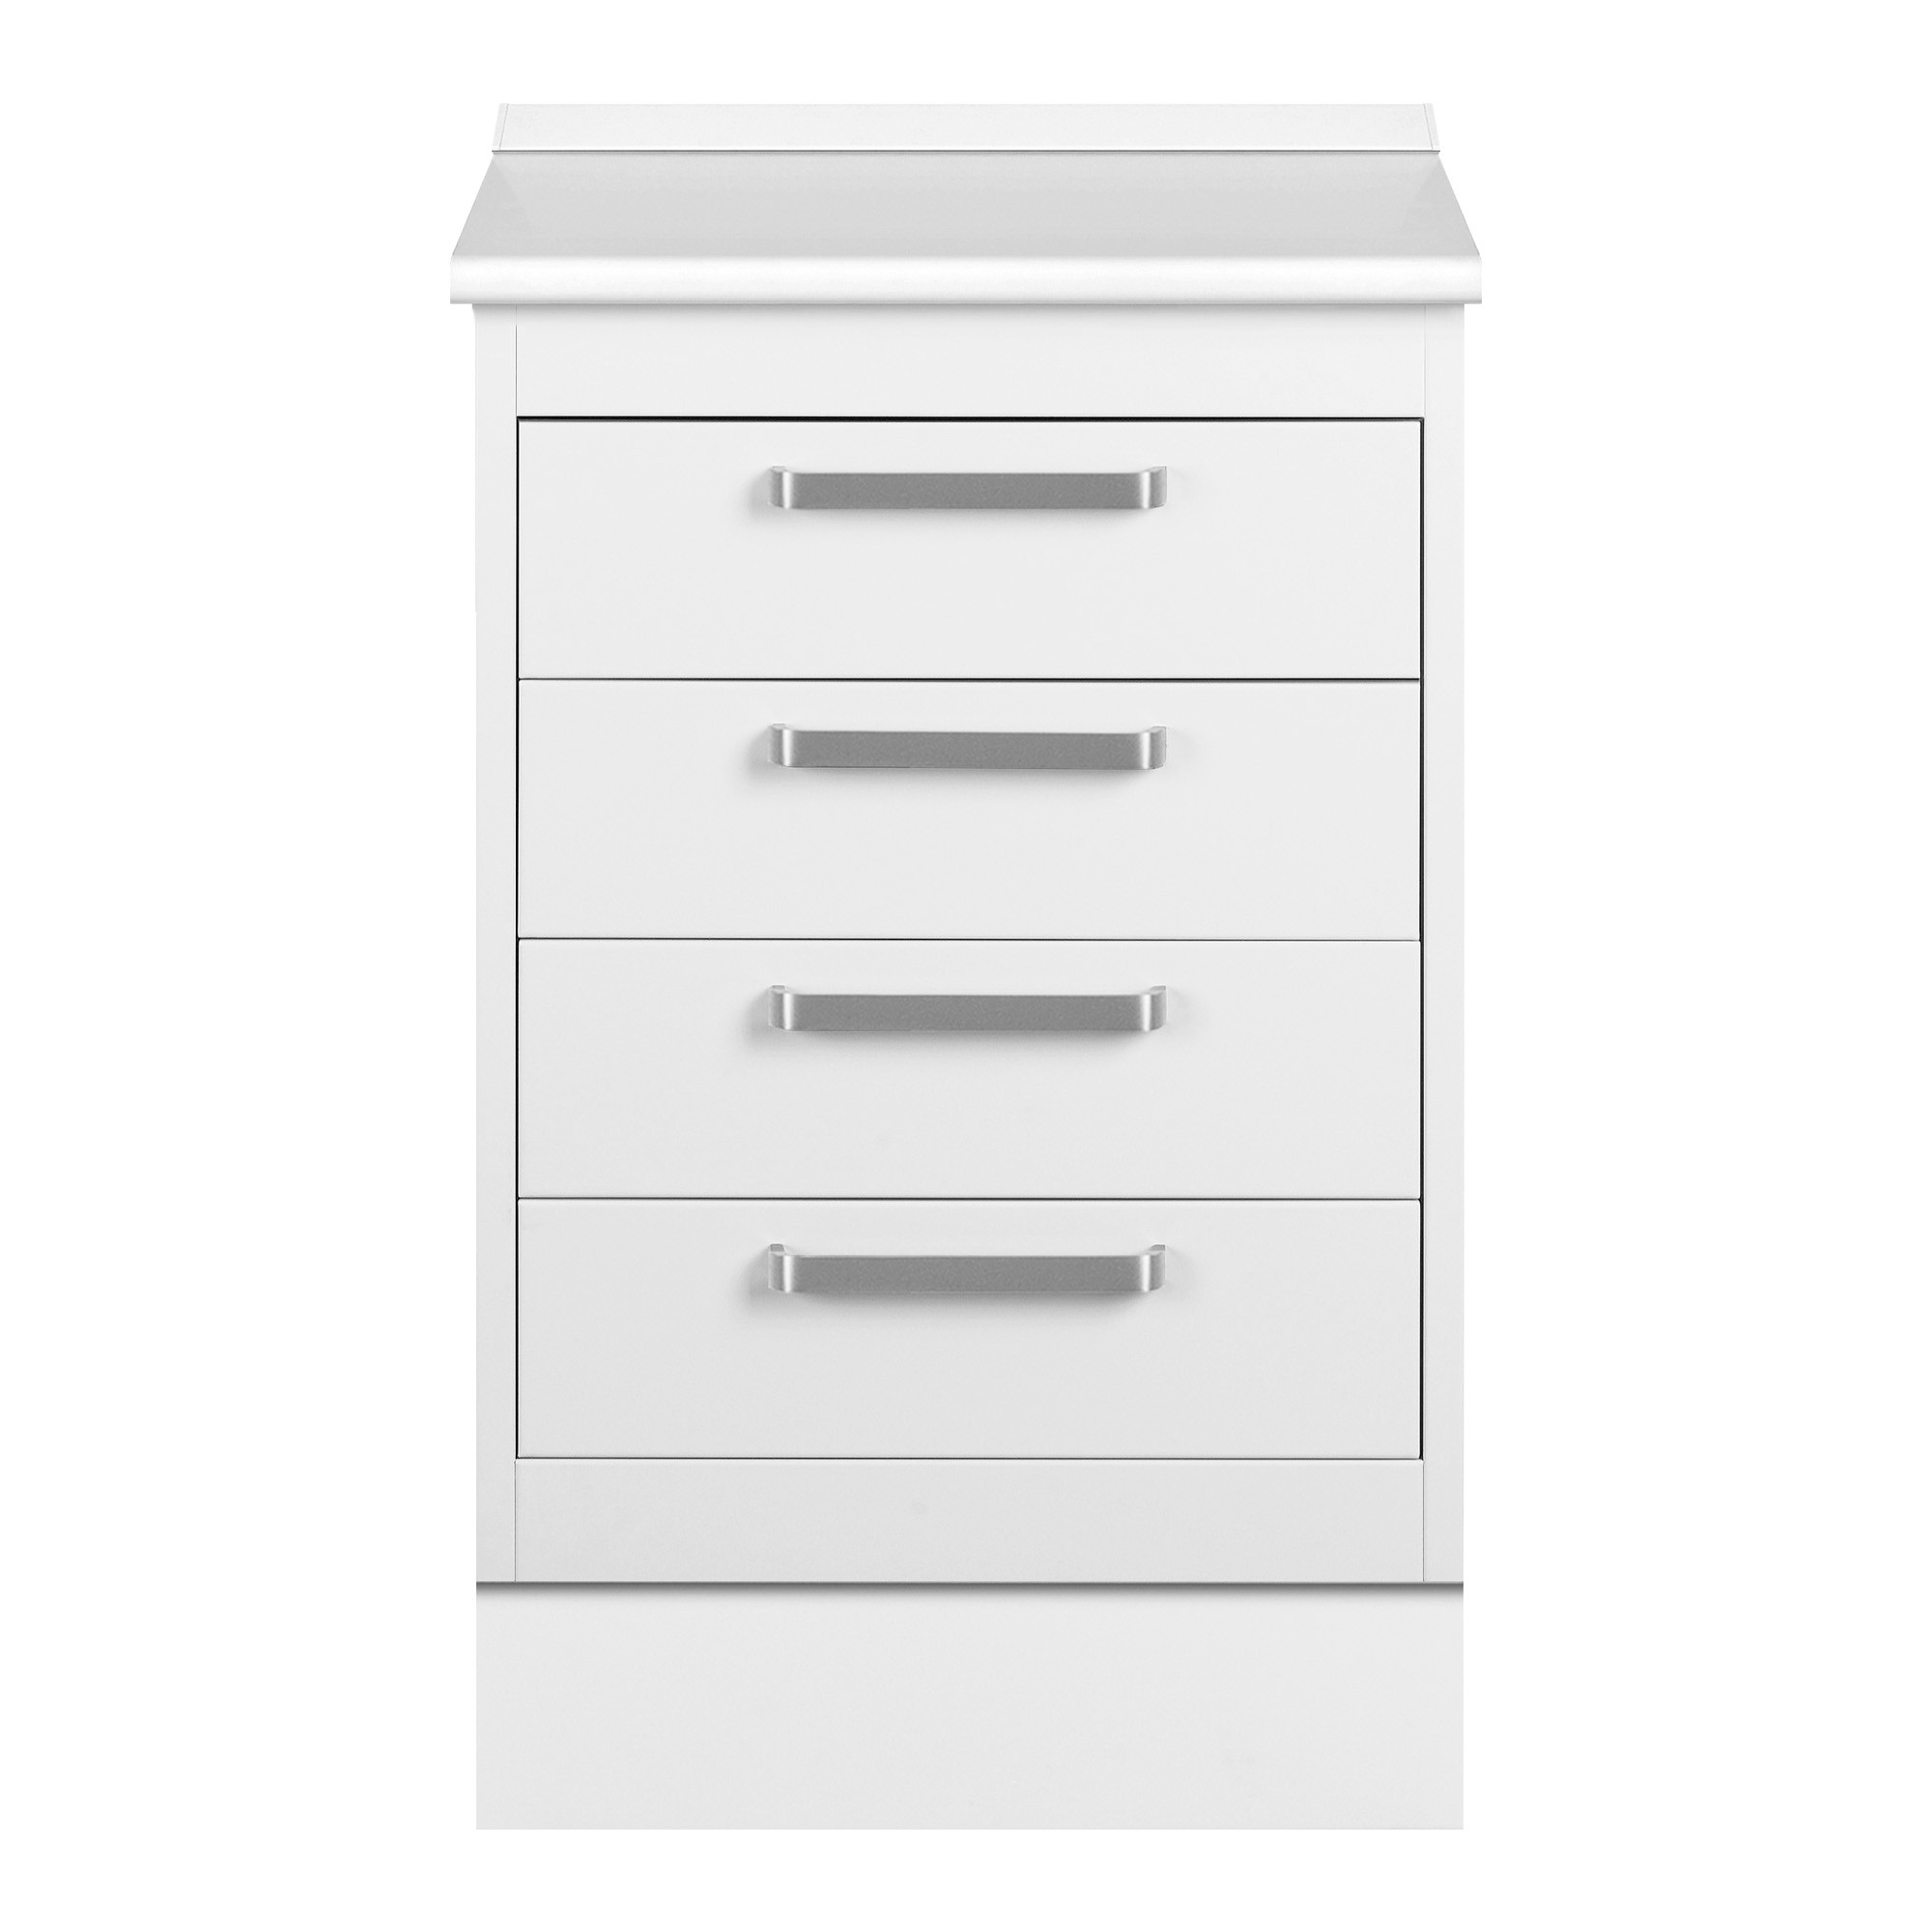 Module with 4 drawers and plinth